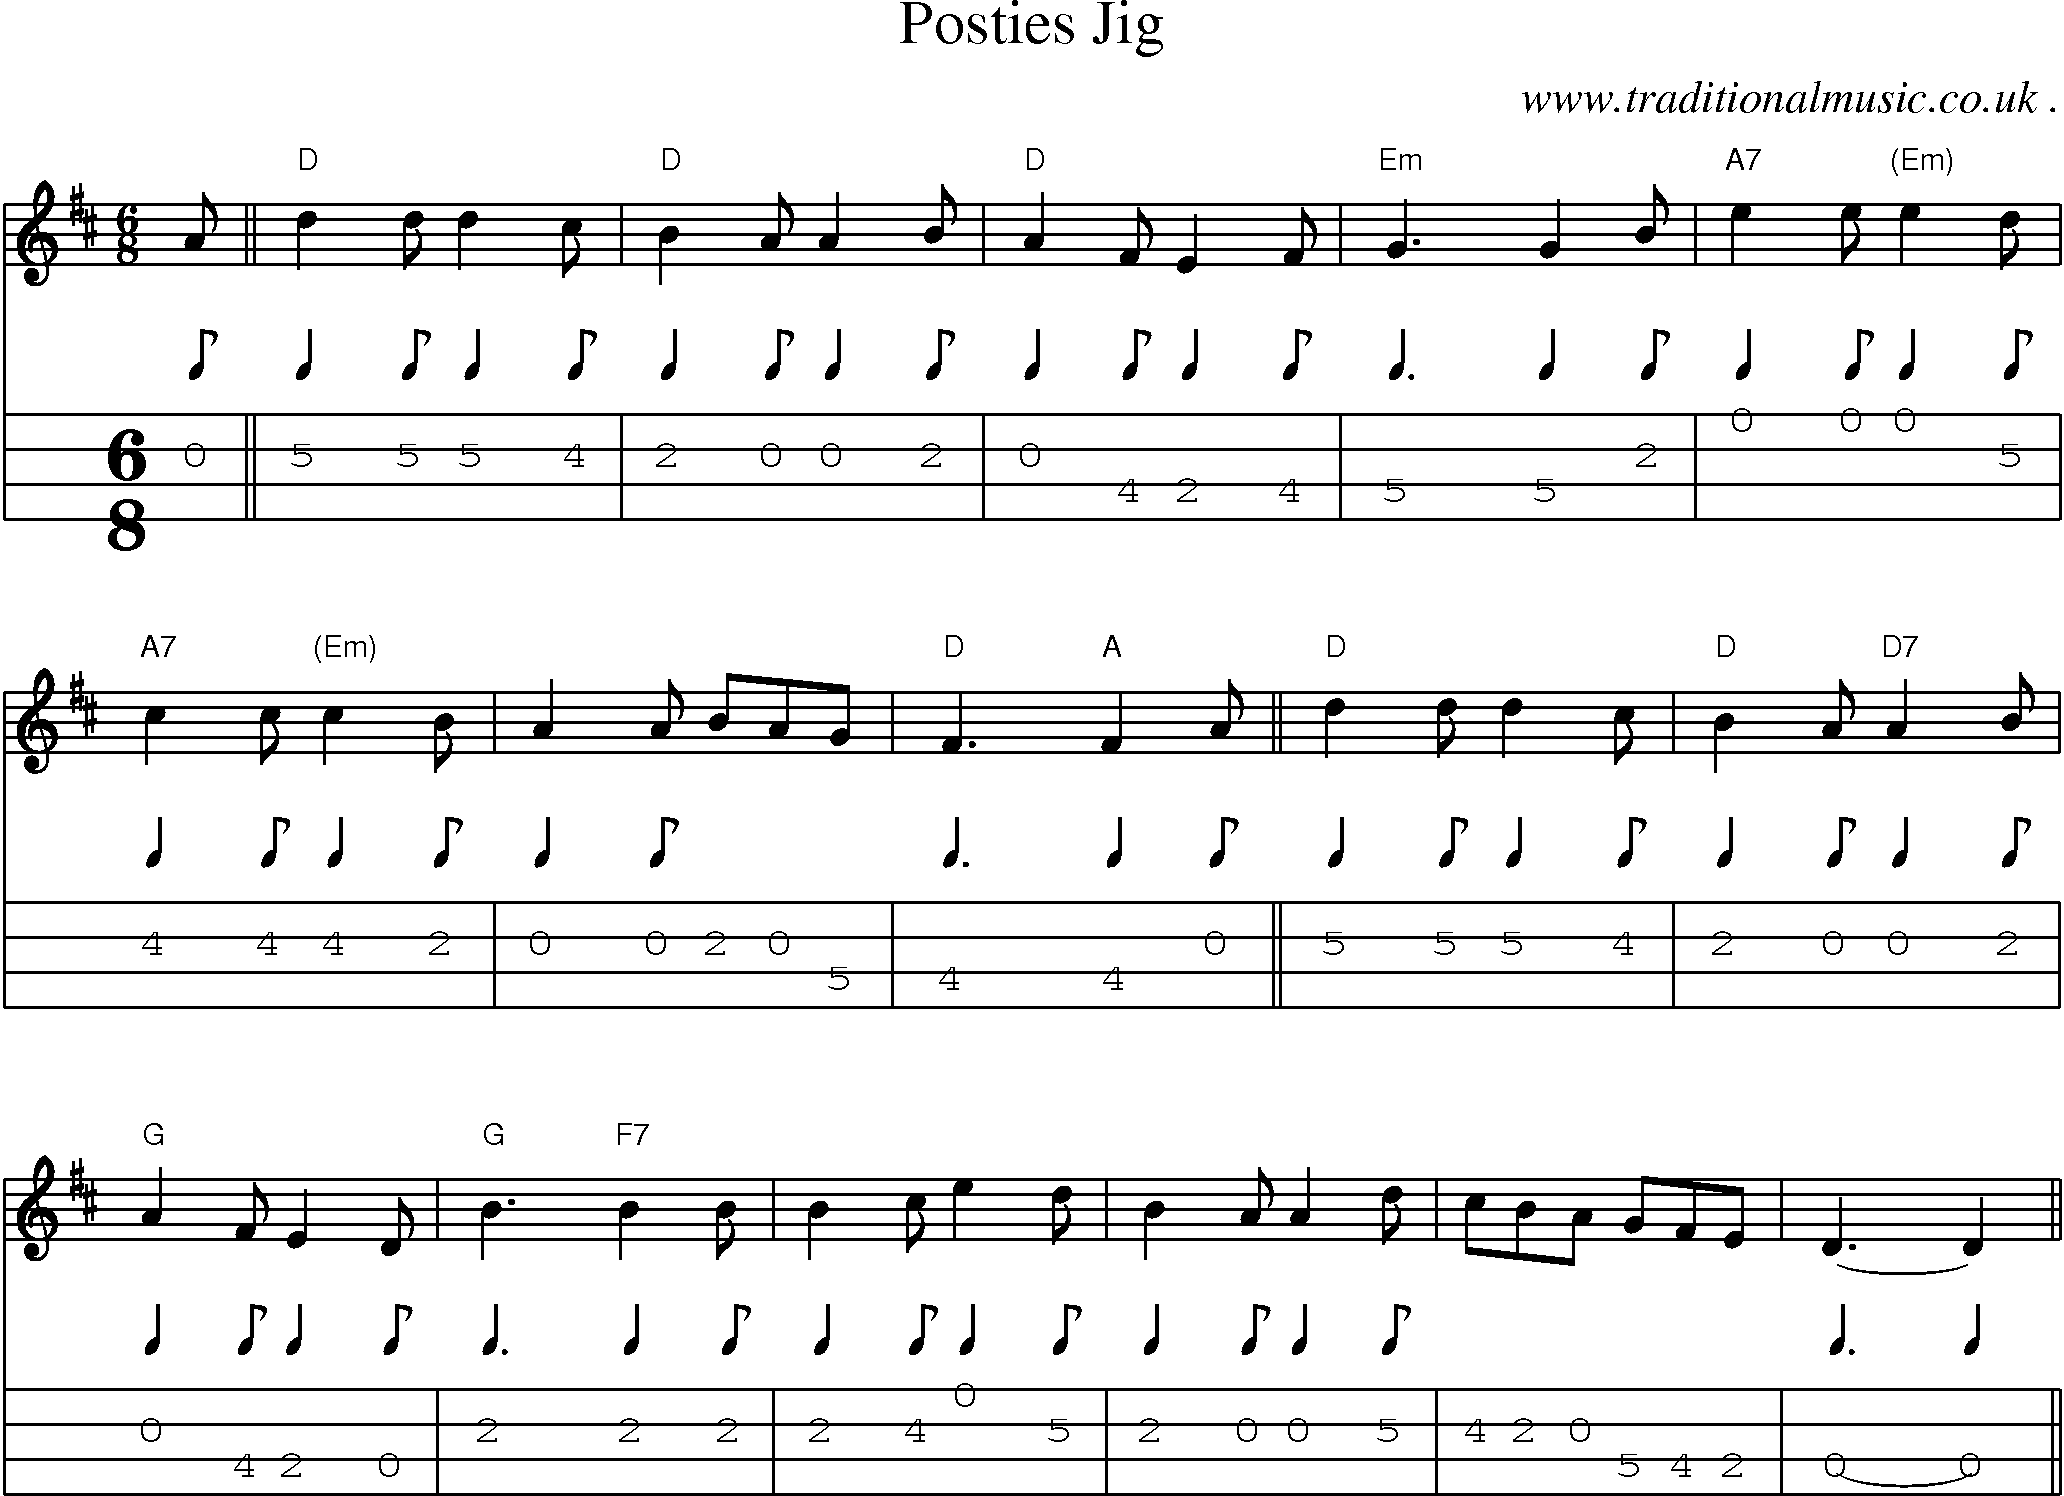 Sheet-music  score, Chords and Mandolin Tabs for Posties Jig